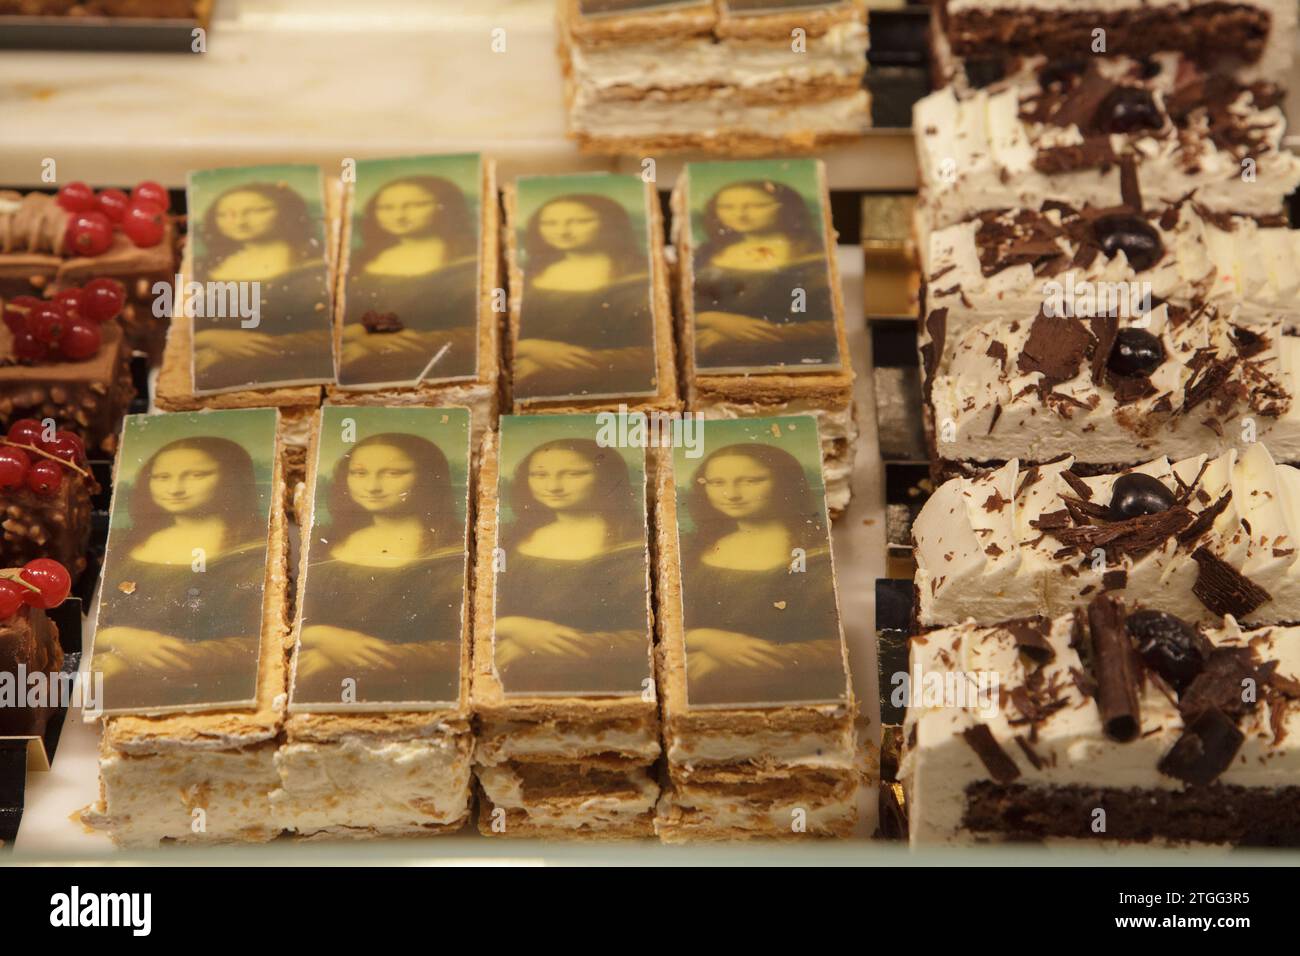 An image of the Mona Lisa is used to top dessert cakes in the window of the Caffe Concerto in the Carrousel du Louvre, Paris, France Stock Photo